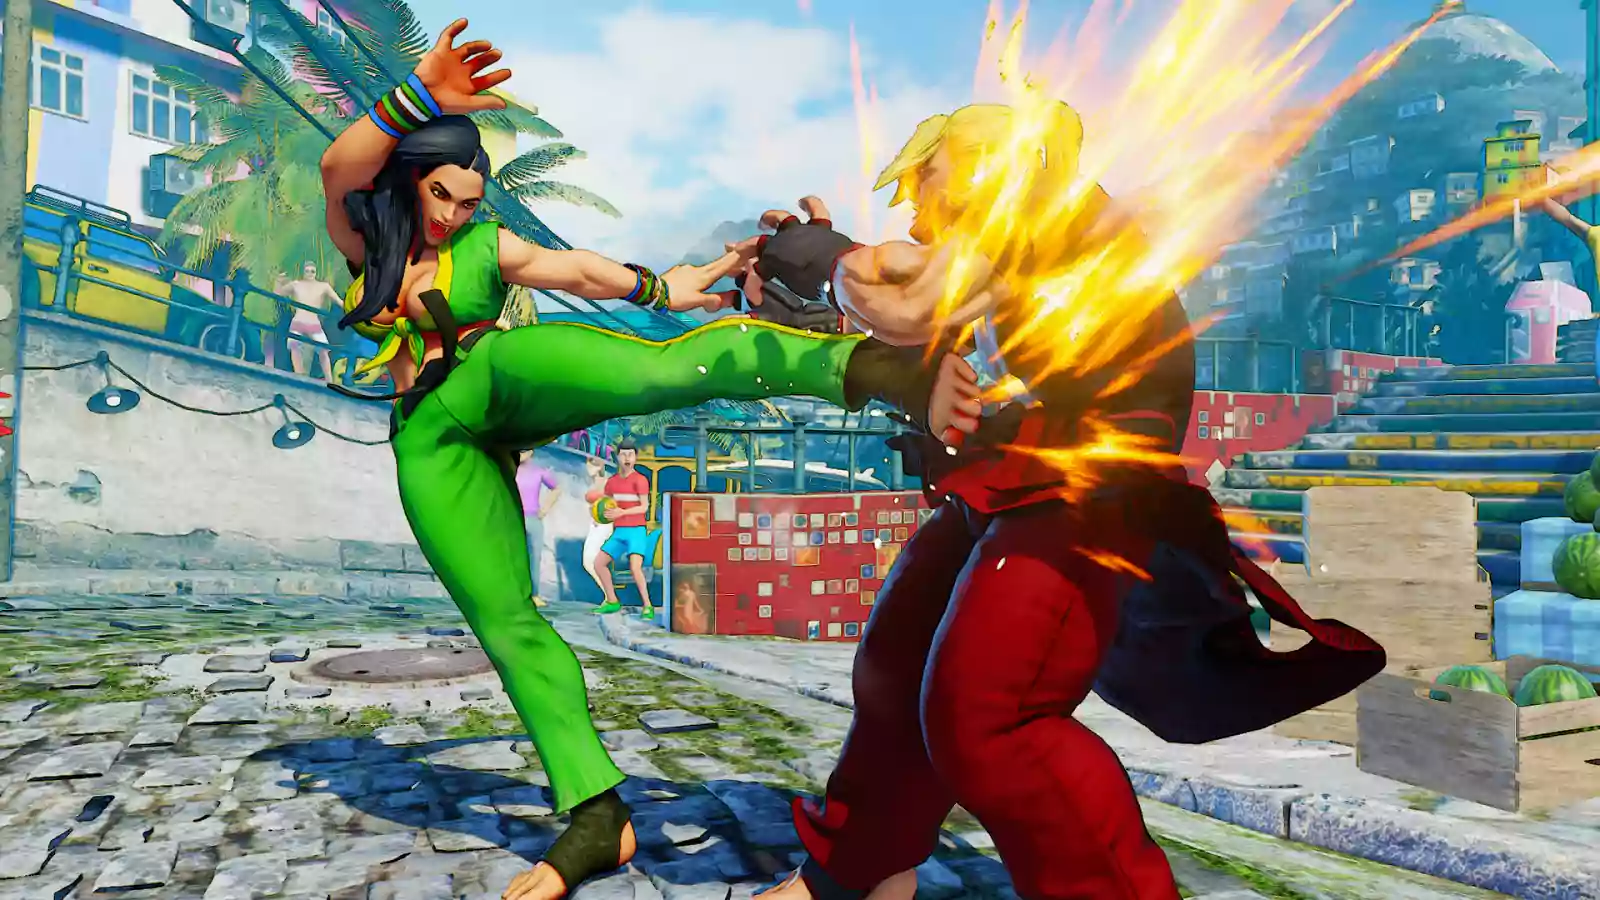 Street Fighter V Announced With New Characters